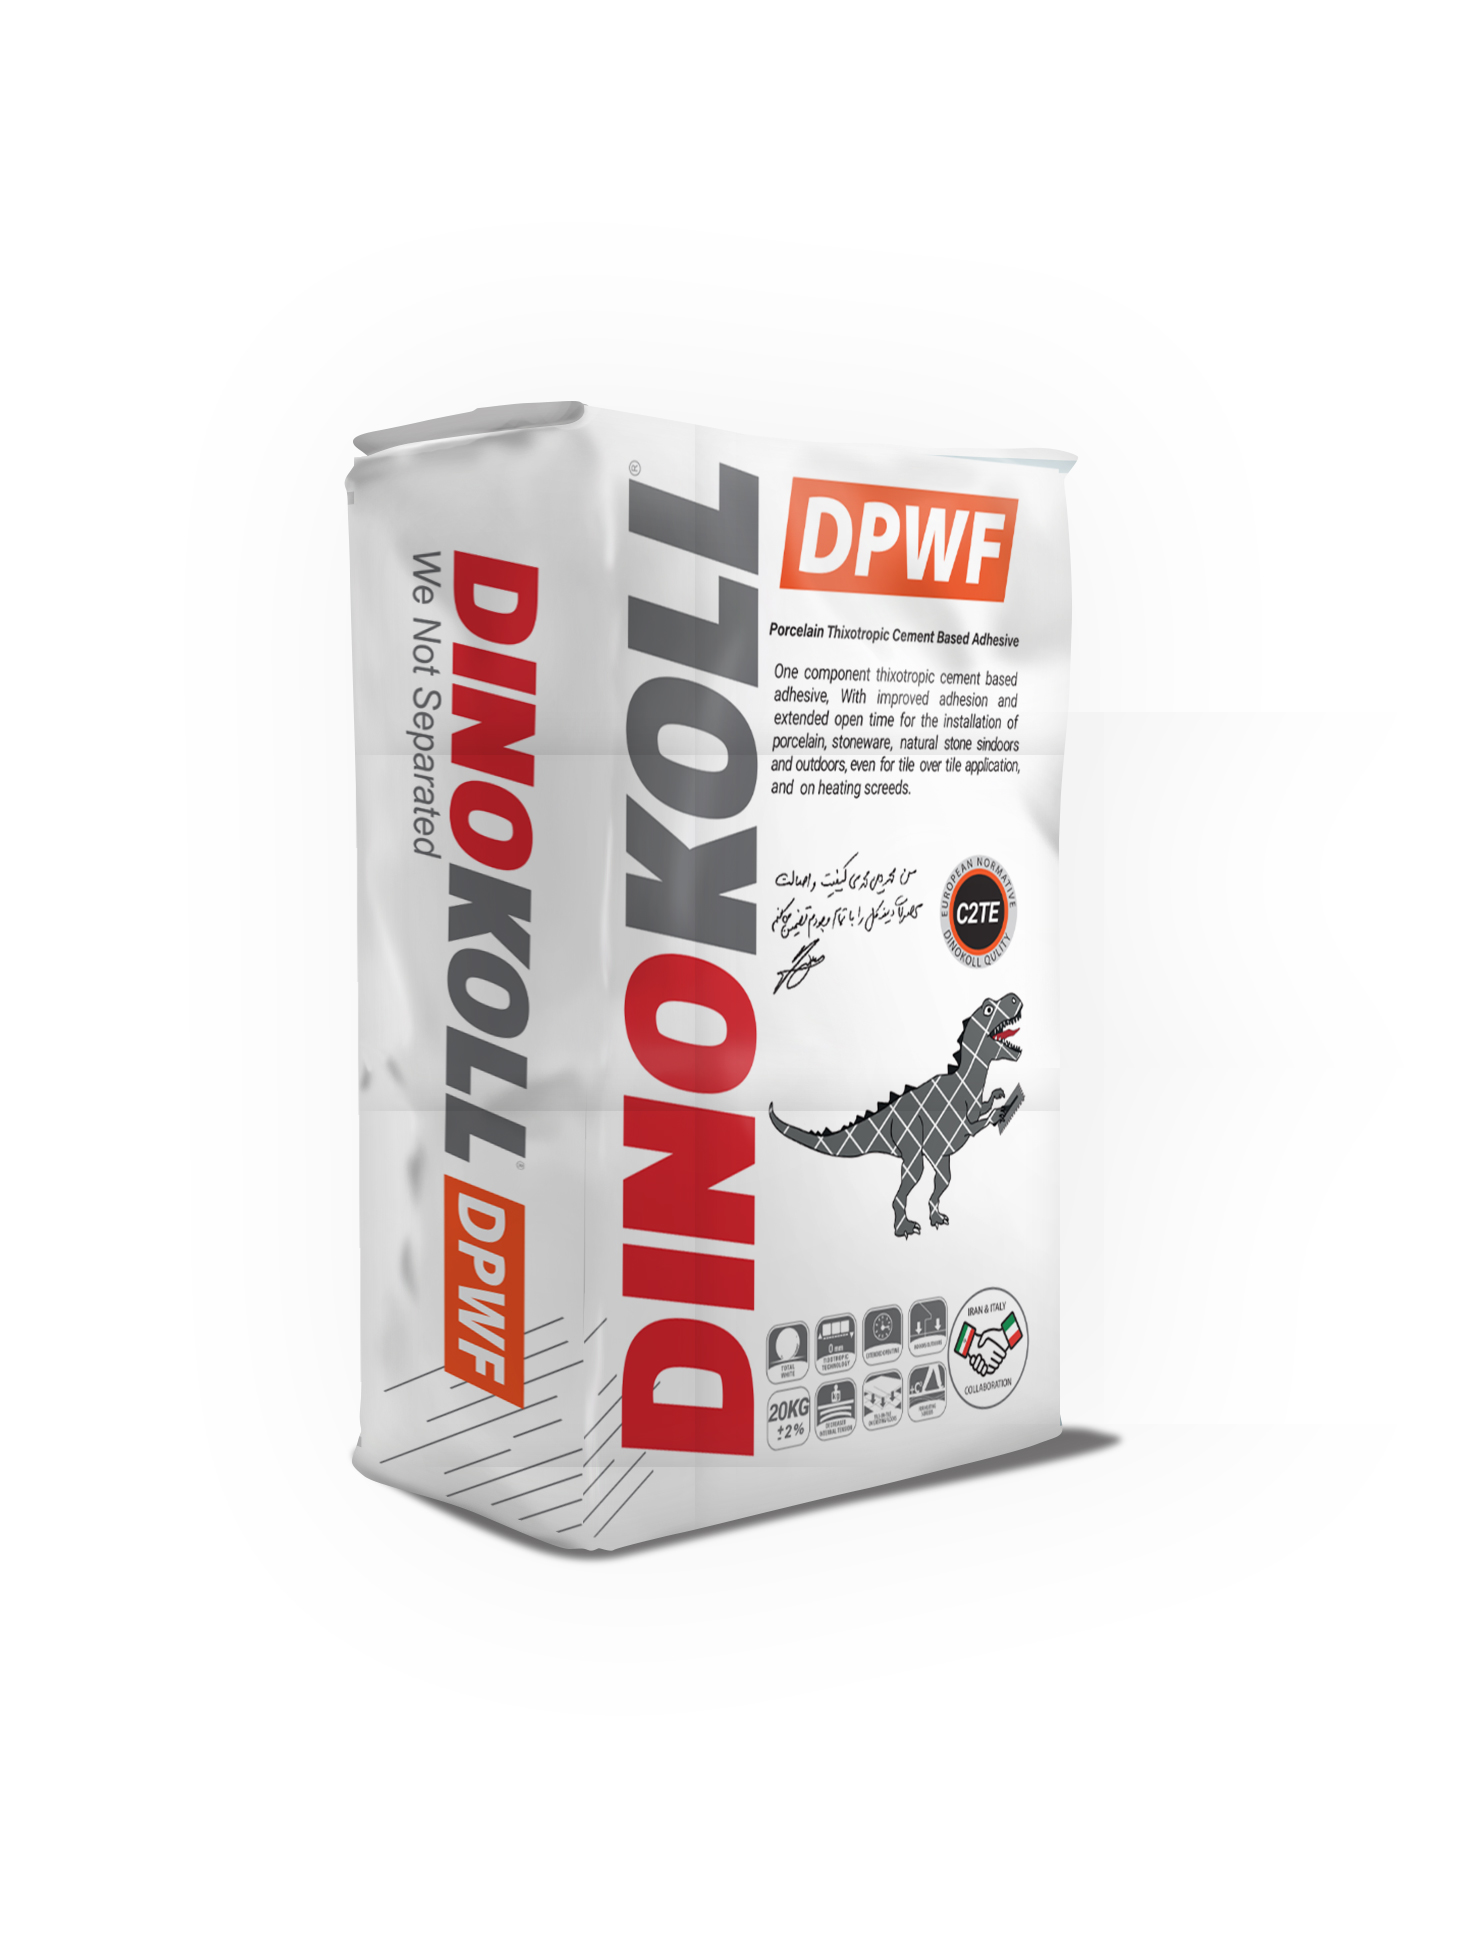 Floor and wall porcelain Adhesive - DPWF